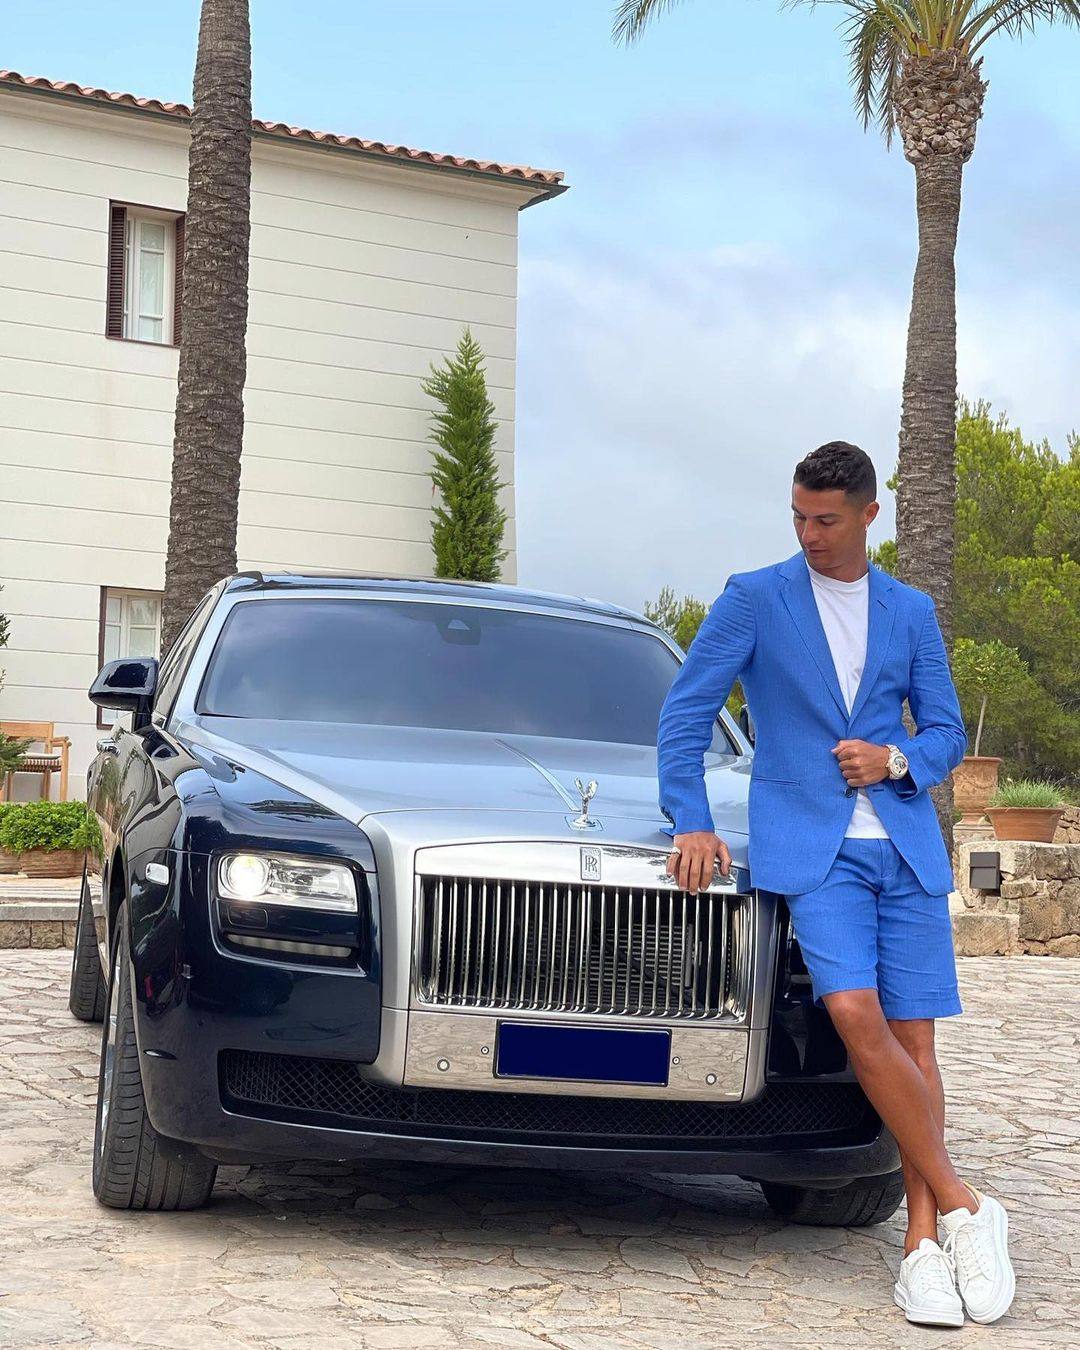 How Cristiano Ronaldo became football's first billionaire – from record-breaking Manchester United merchandise sales to charging US$1 million per paid Instagram post | South China Morning Post